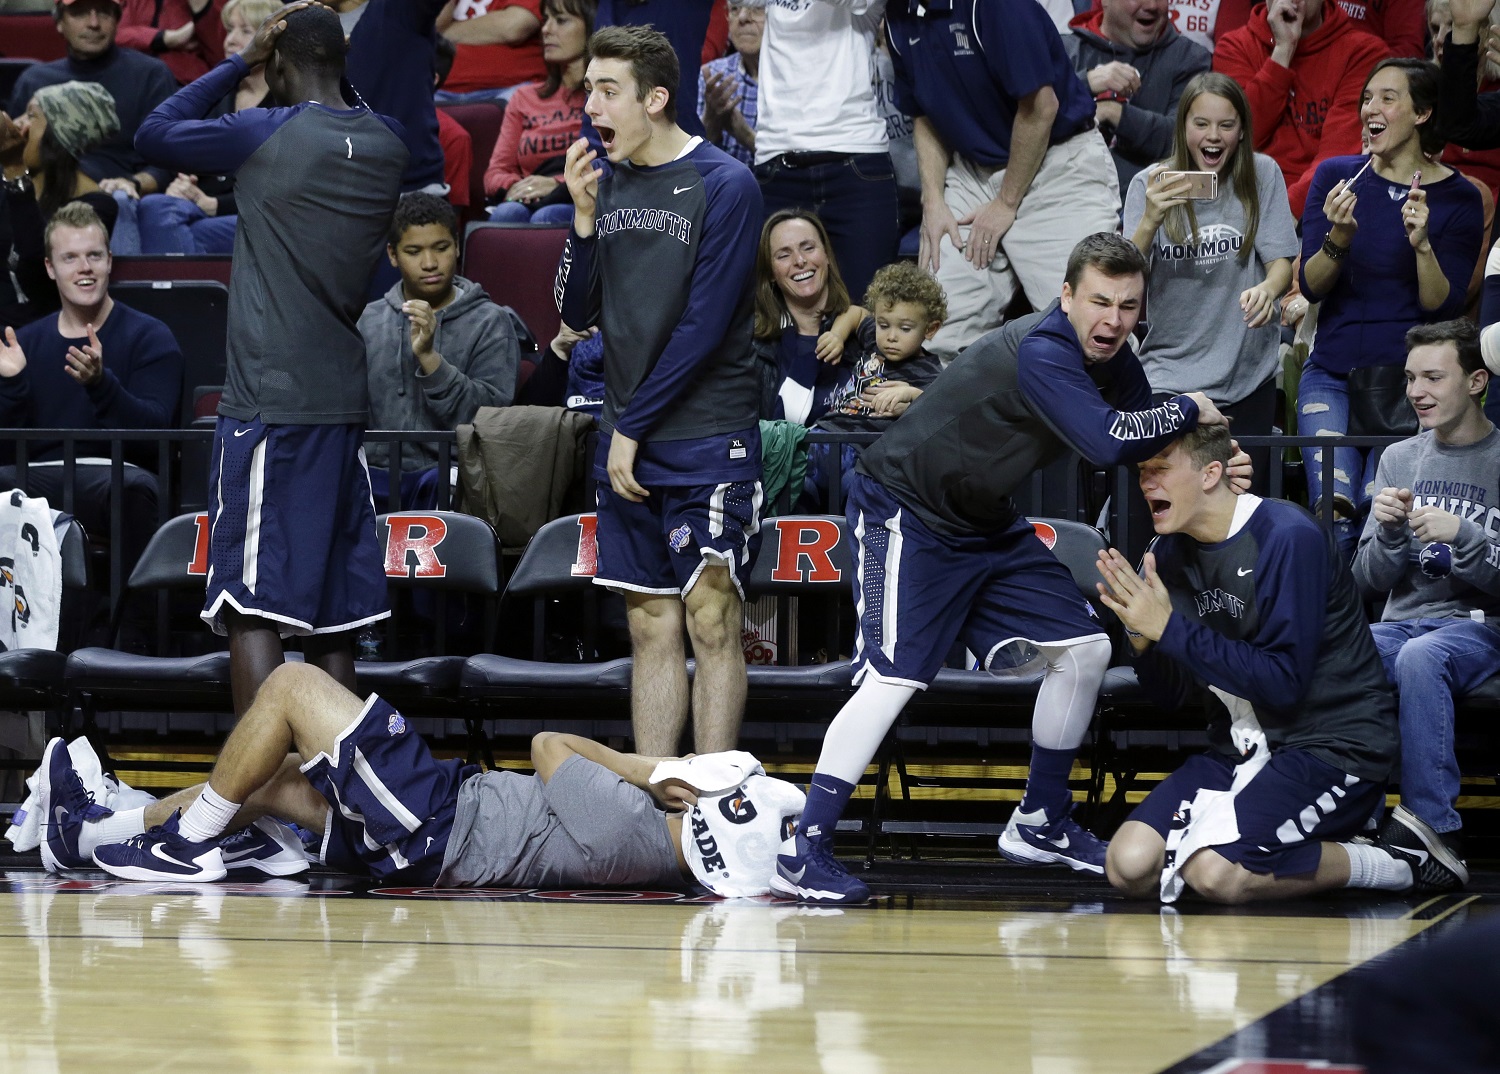 Monmouth players react on the bench to a play during the first half of an NCAA college basketball game against Rutgers, Sunday, Dec. 20, 2015, in Piscataway, N.J.  (AP Photo/Mel Evans)